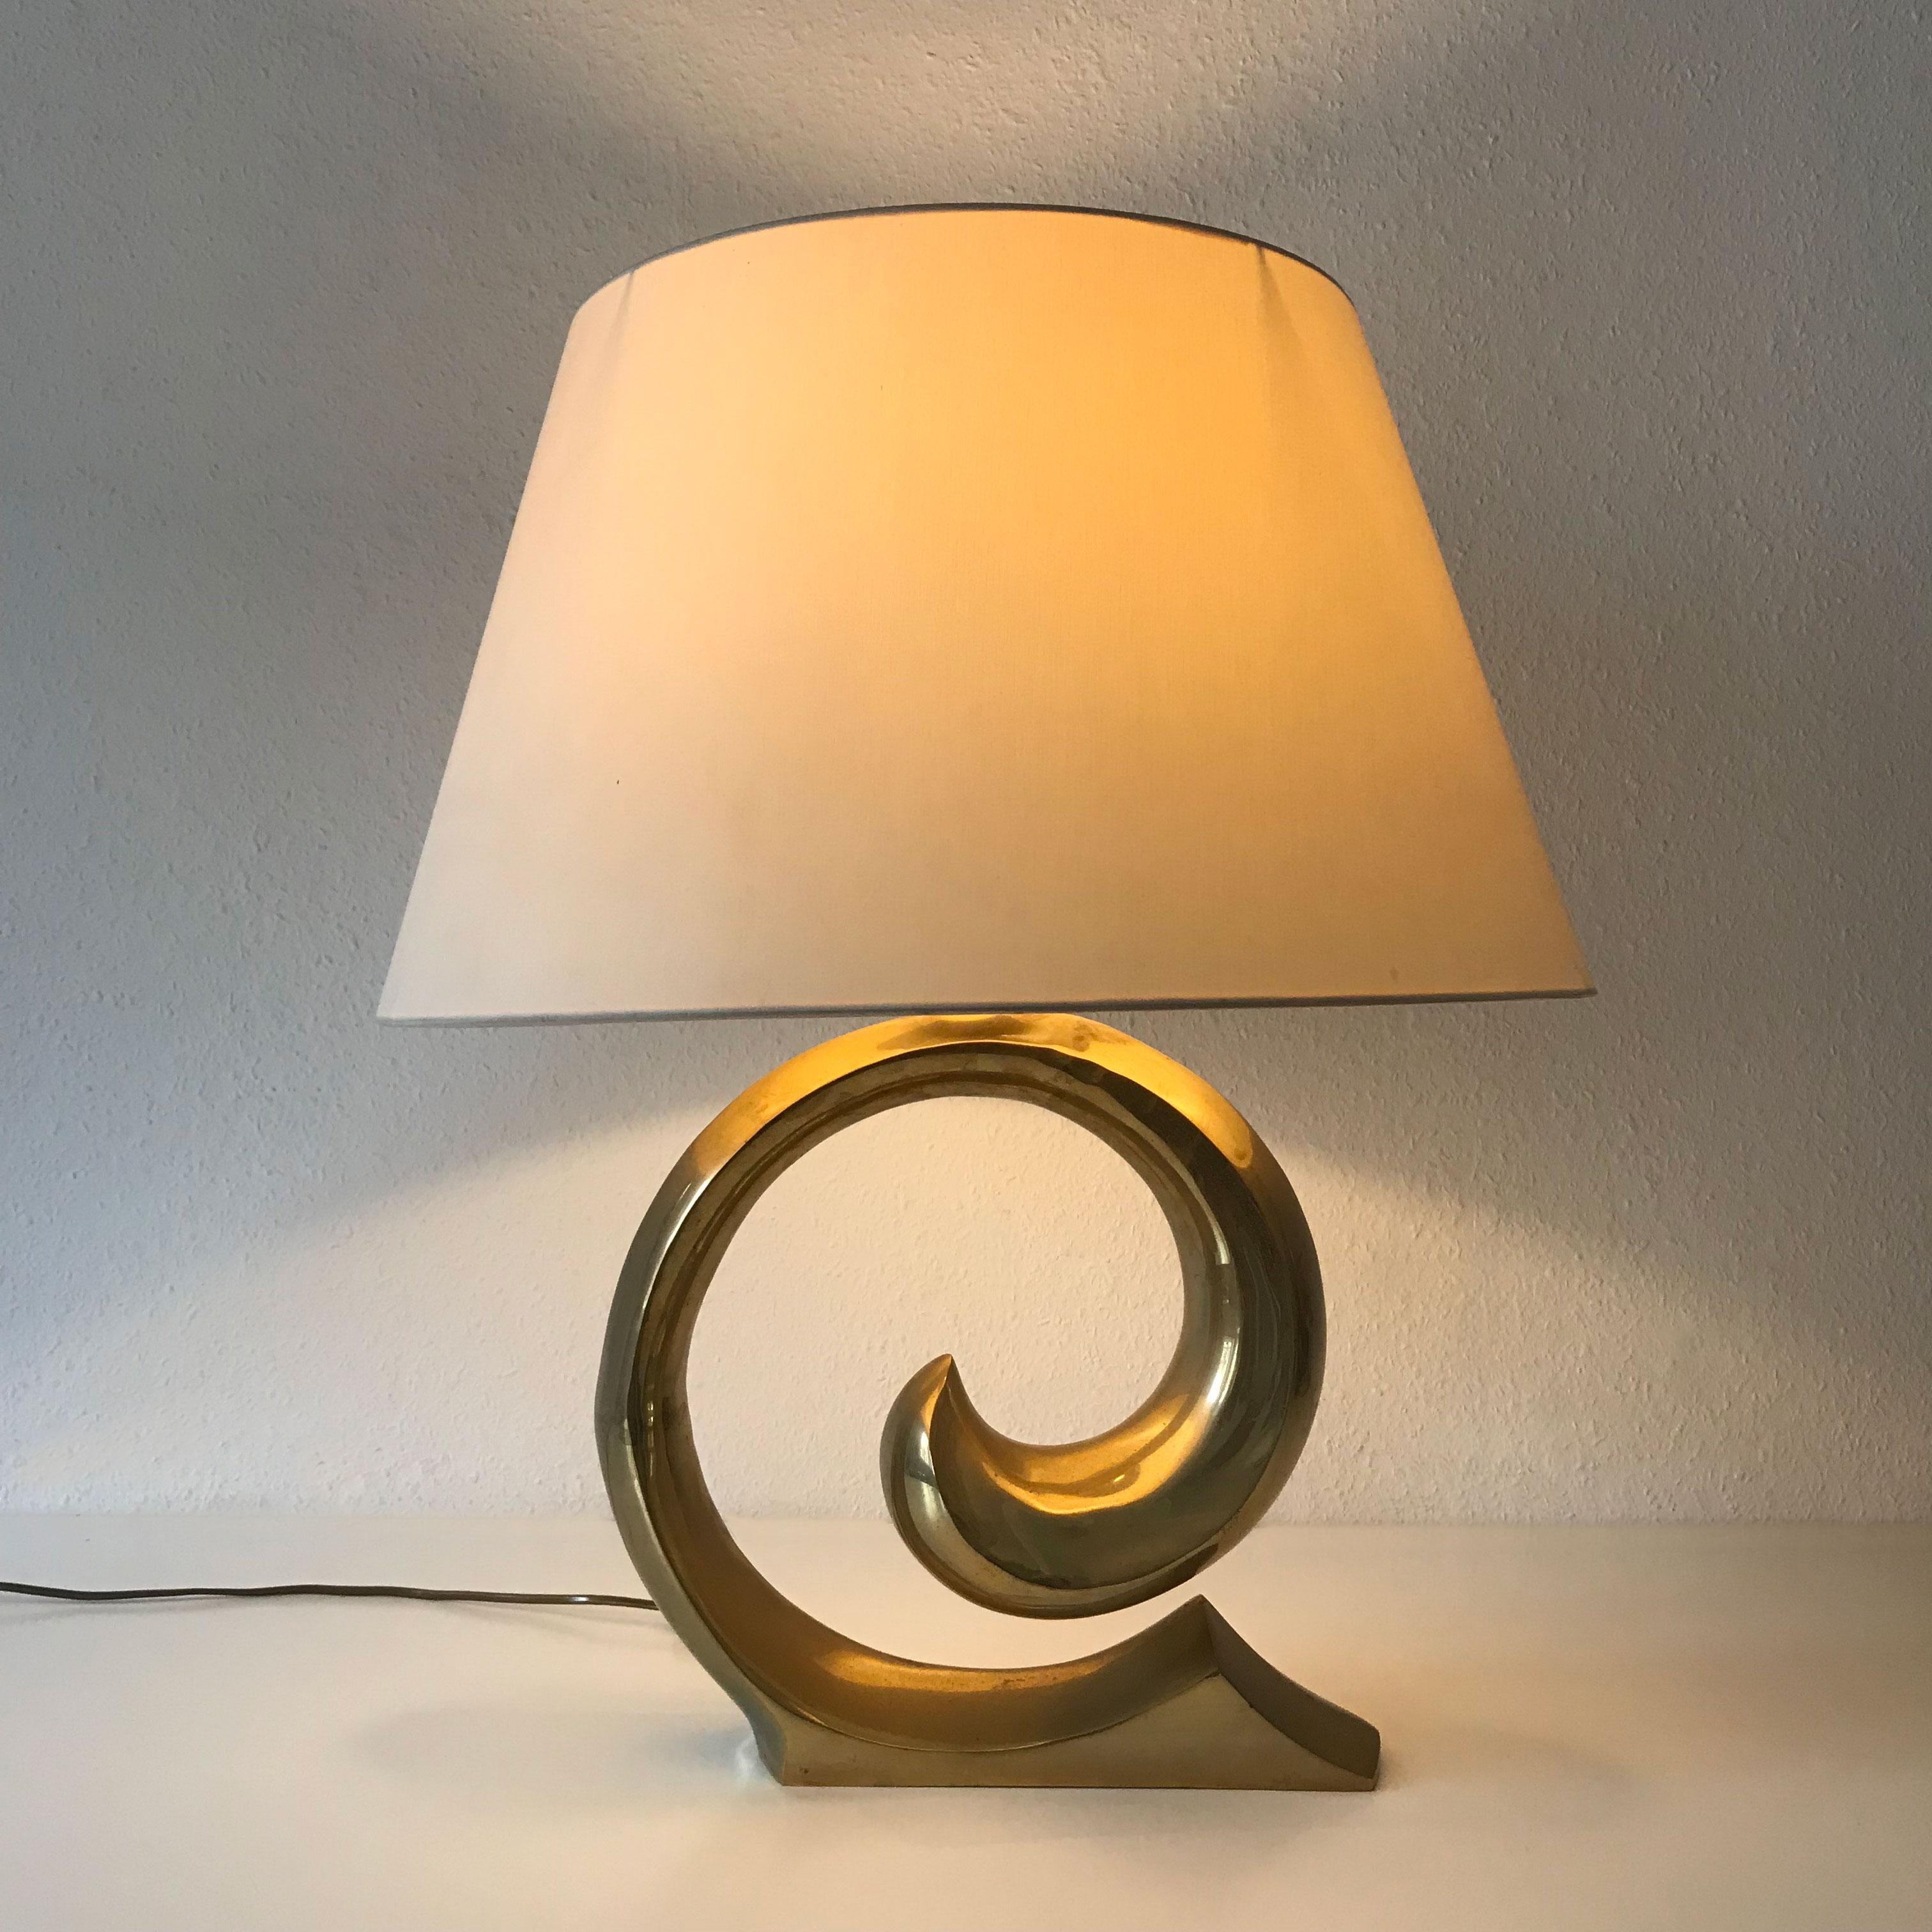 Monumental Mid-Century Modern brass table lamp. Designed probably by Pierre Cardin, 1970s, France.
This elegant table lamp is executed in massive brass and with 1 x E27 screw fit socket. It is wired, in working condition and runs on both 110 and